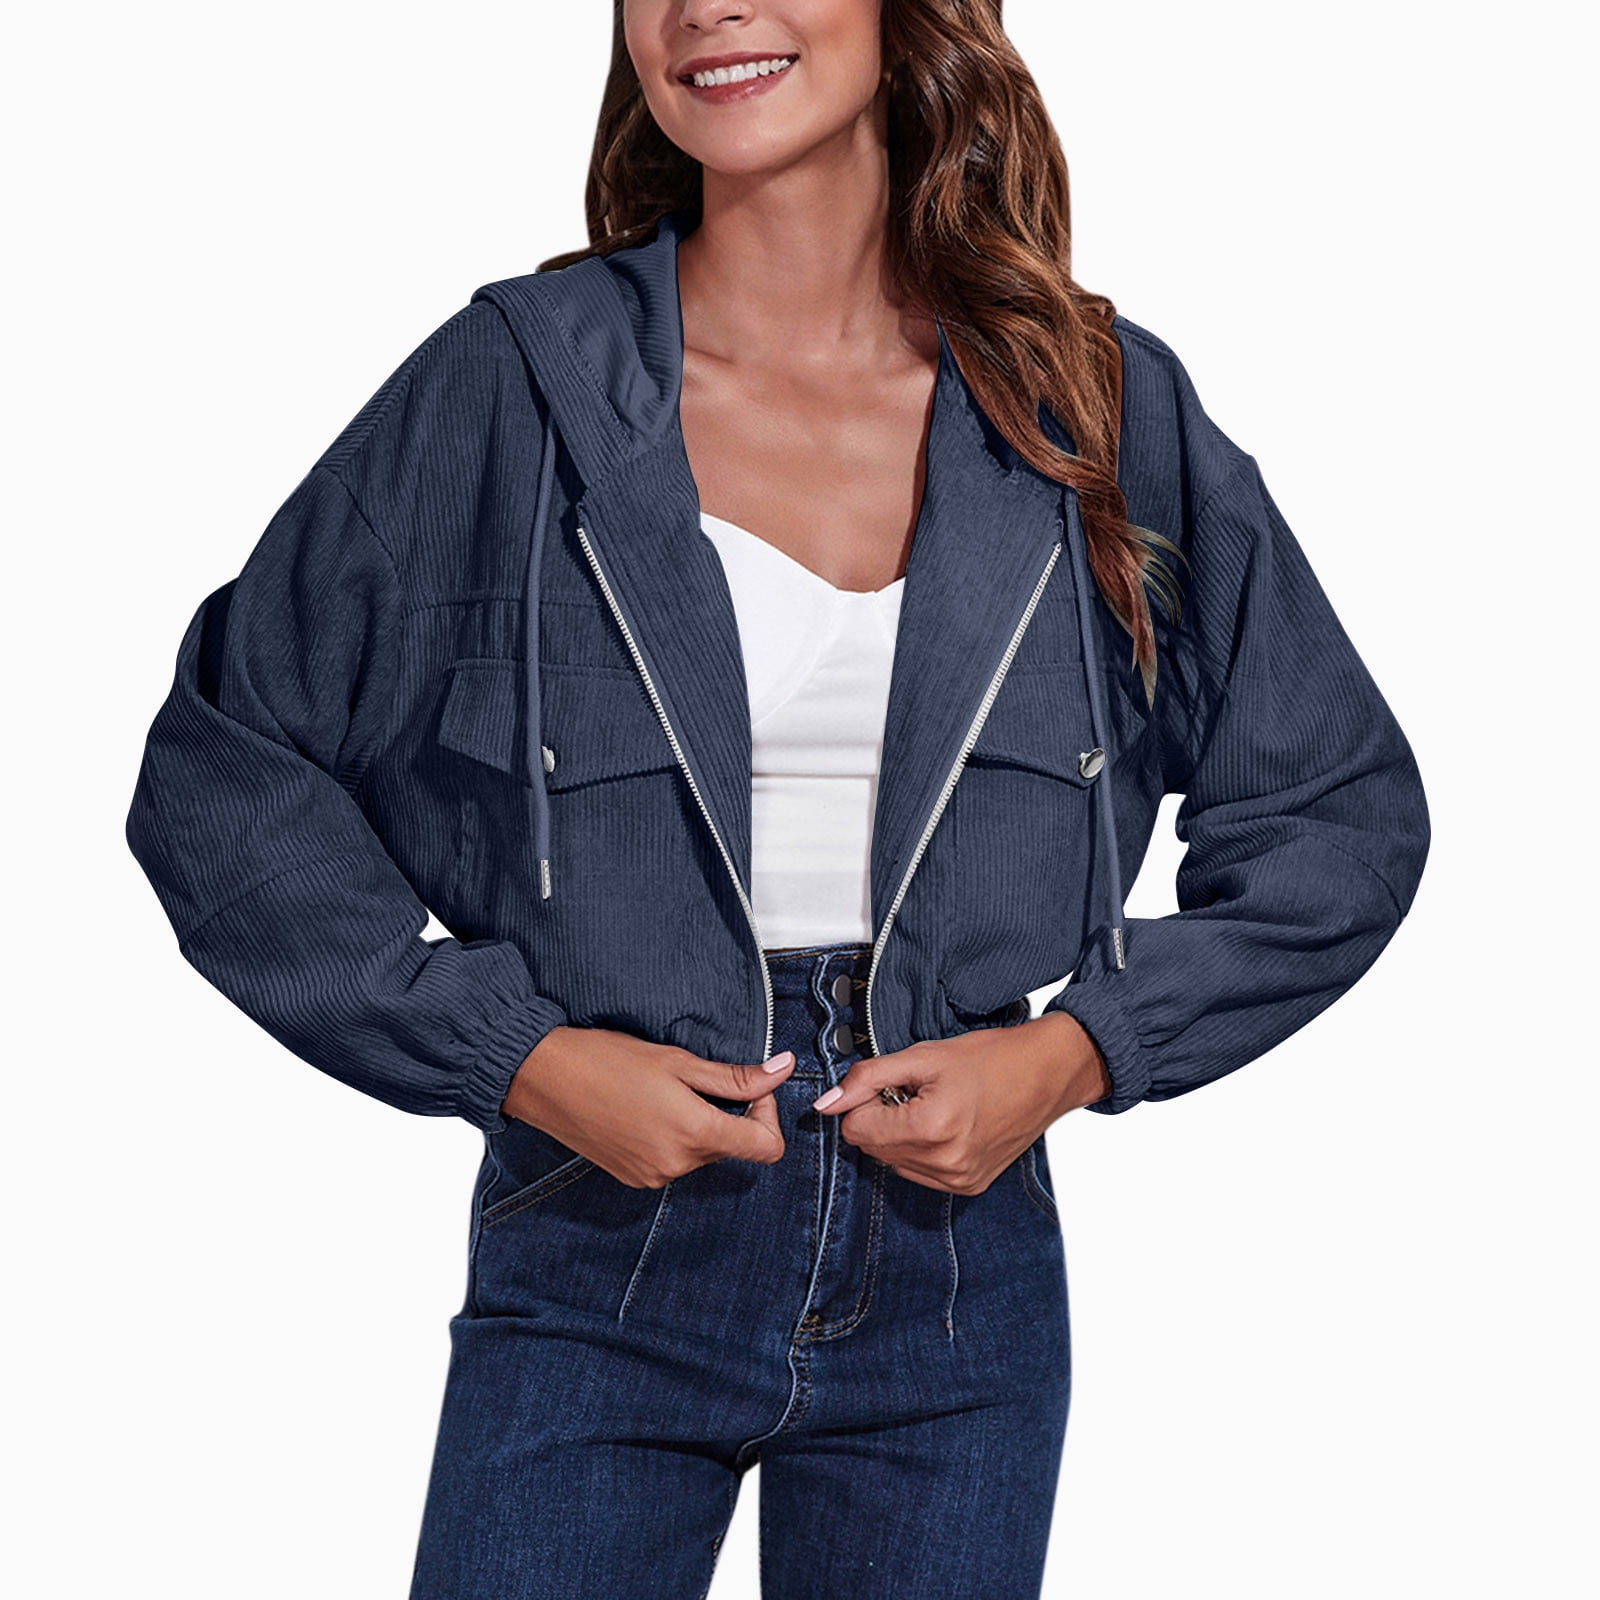 The Best Summer Jacket Women Pack for Any Trip or Destination